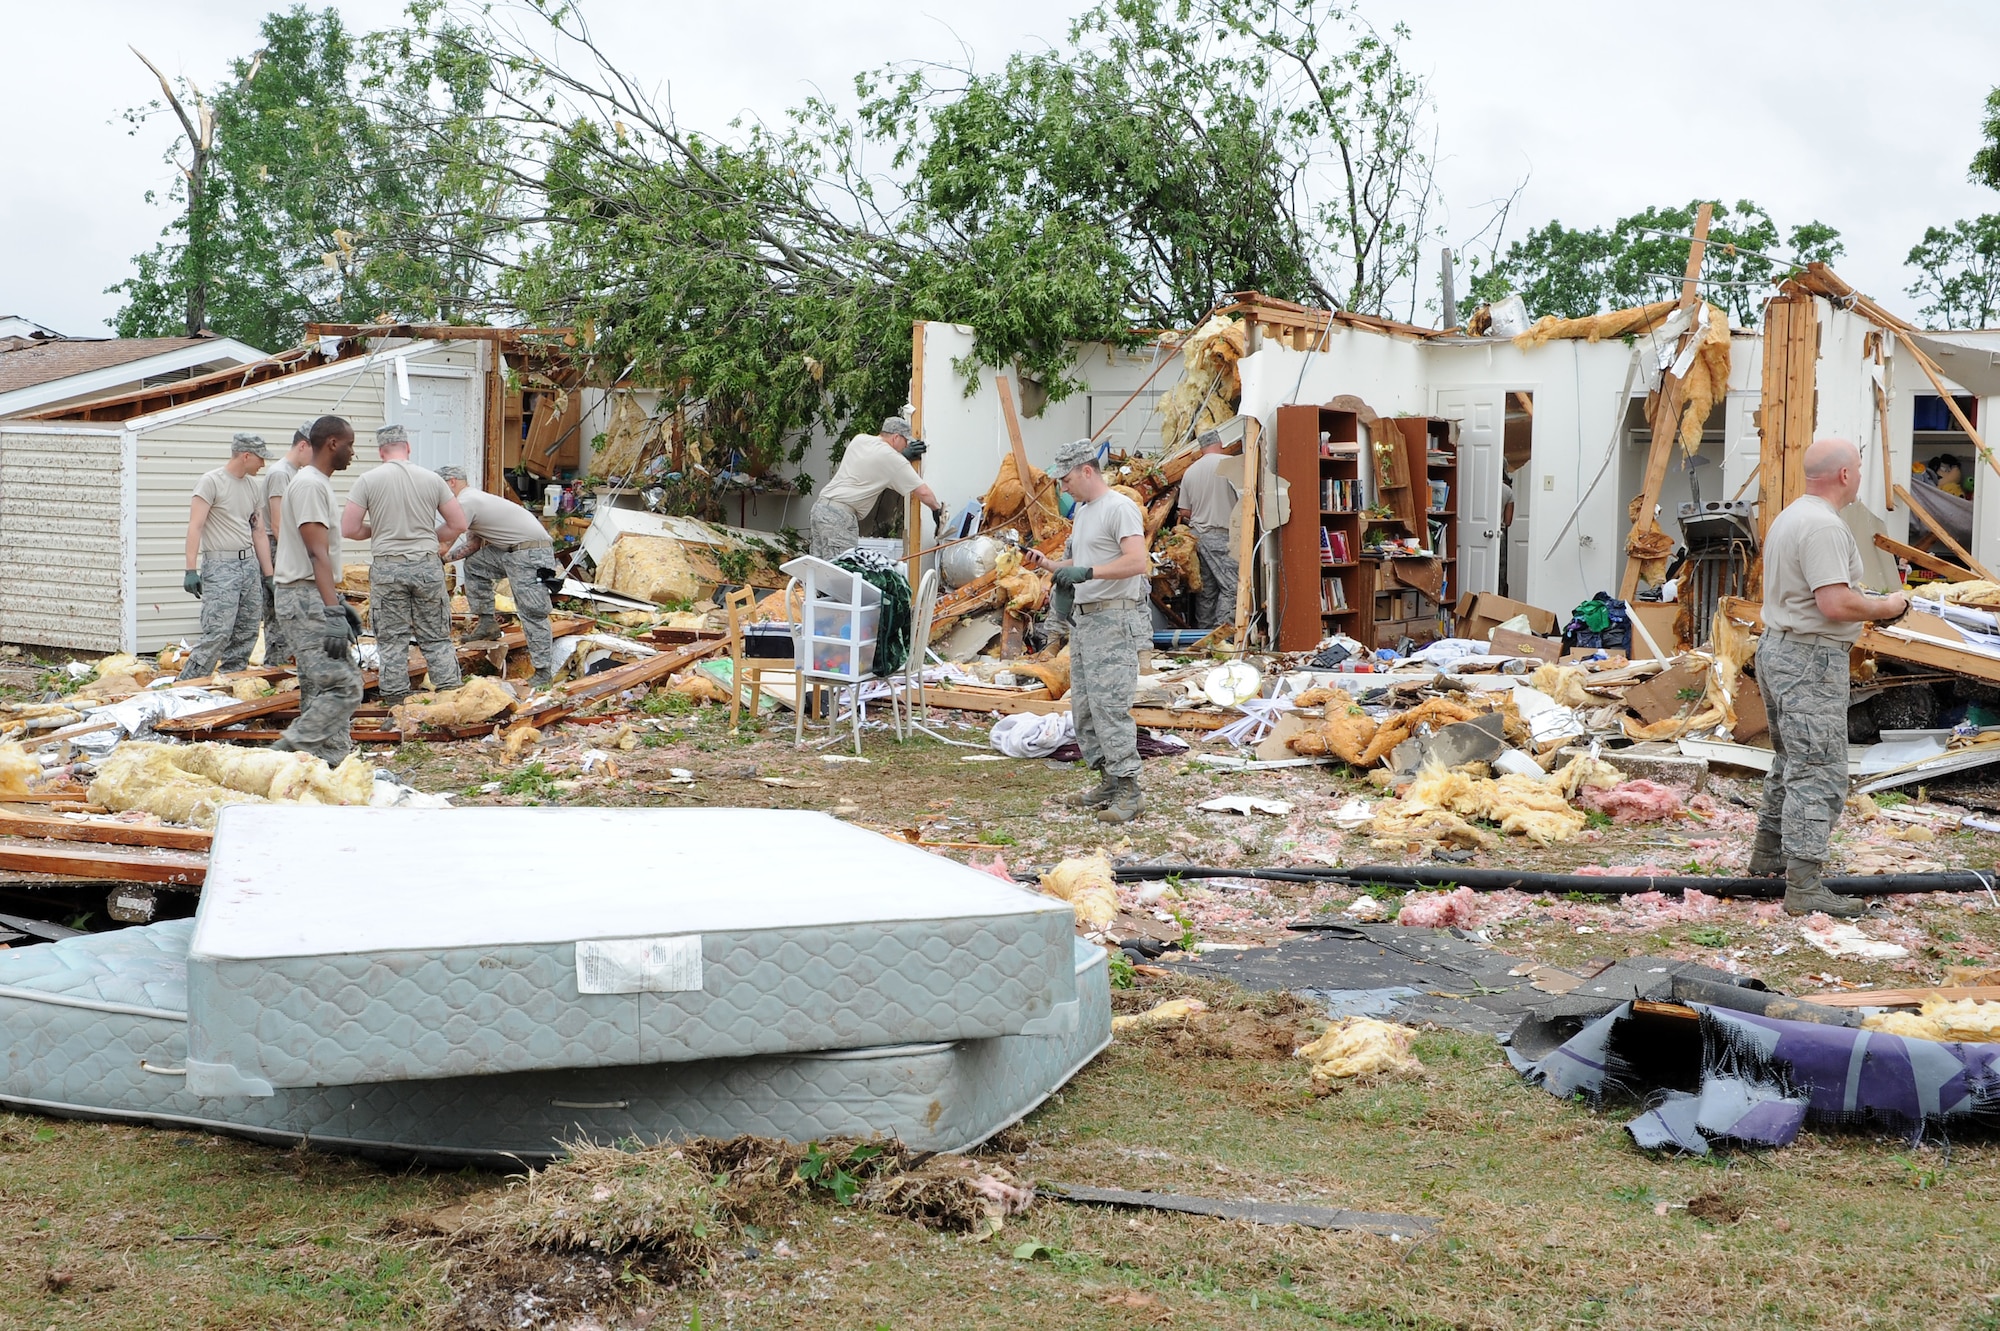 Airmen and family members work to clear debris from base housing after a tornado struck April 25, 2011, at Little Rock Air Force Base, Ark. Several families were relocated from damaged homes to base billeting. (U. S. Air Force photo by Airman 1st Class Ellora Stewart)